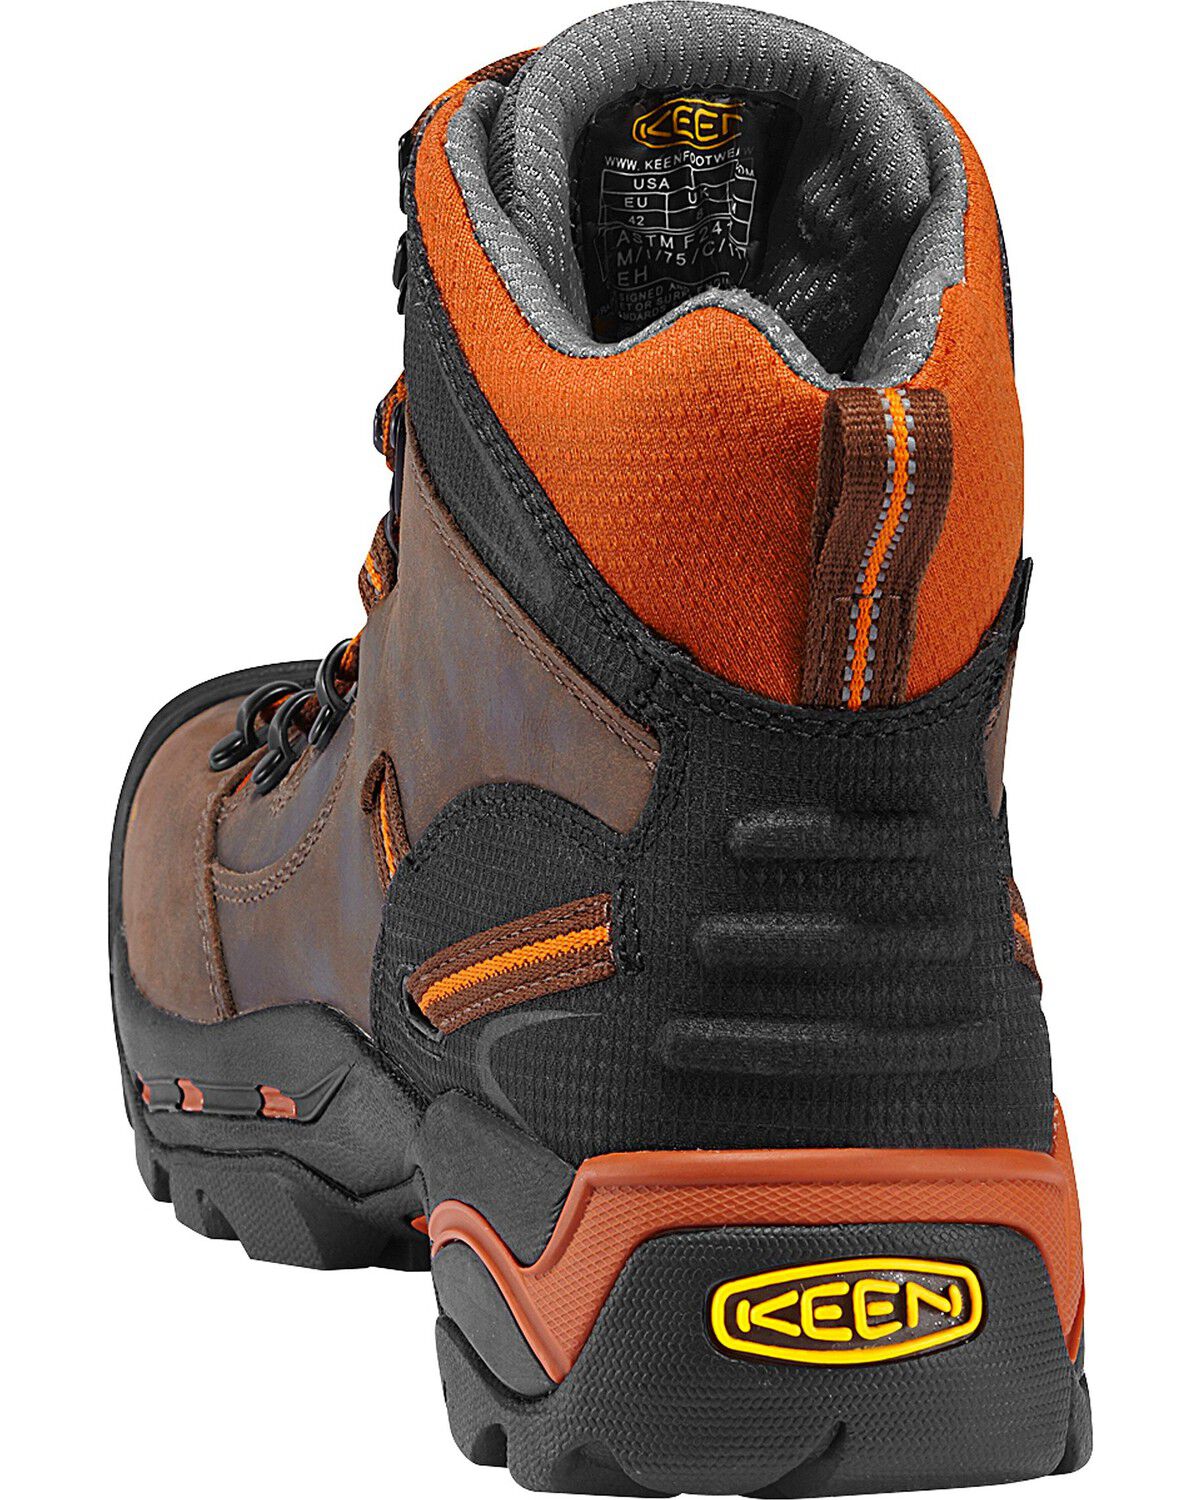 keen pittsburgh soft toe work boots